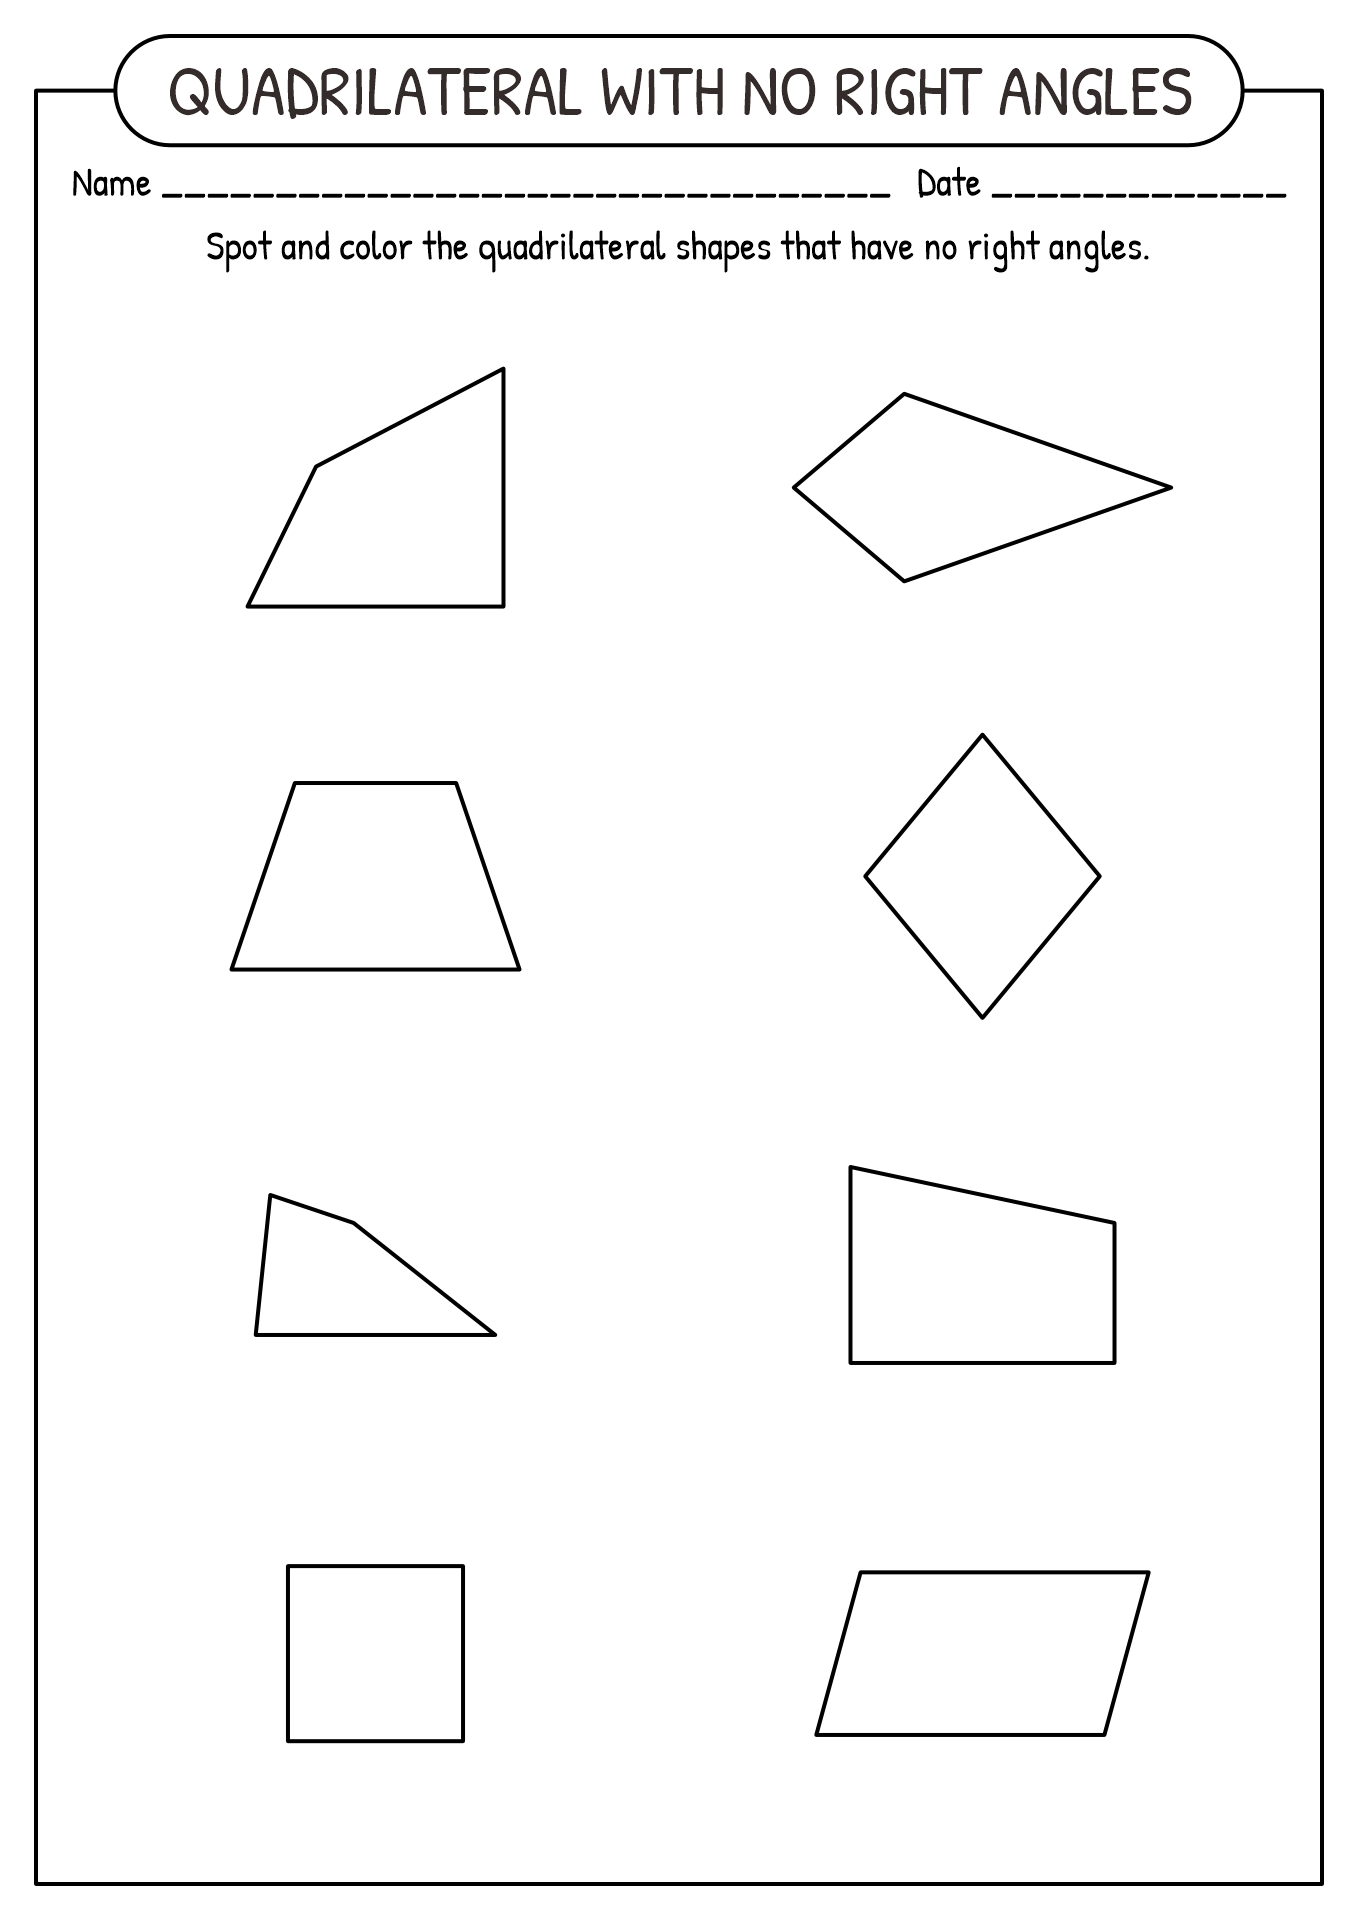 Quadrilateral with No Right Angles